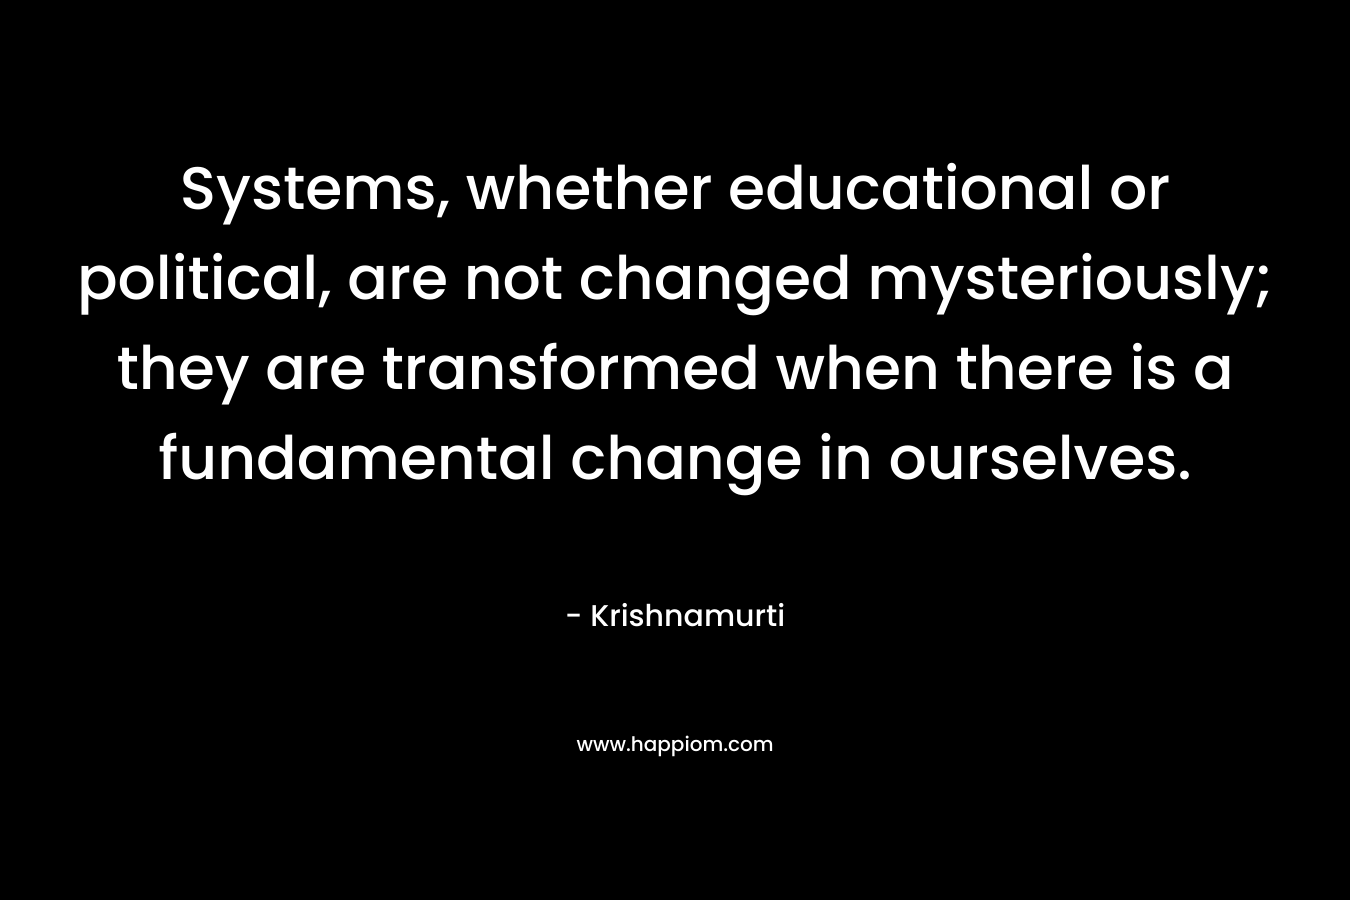 Systems, whether educational or political, are not changed mysteriously; they are transformed when there is a fundamental change in ourselves.